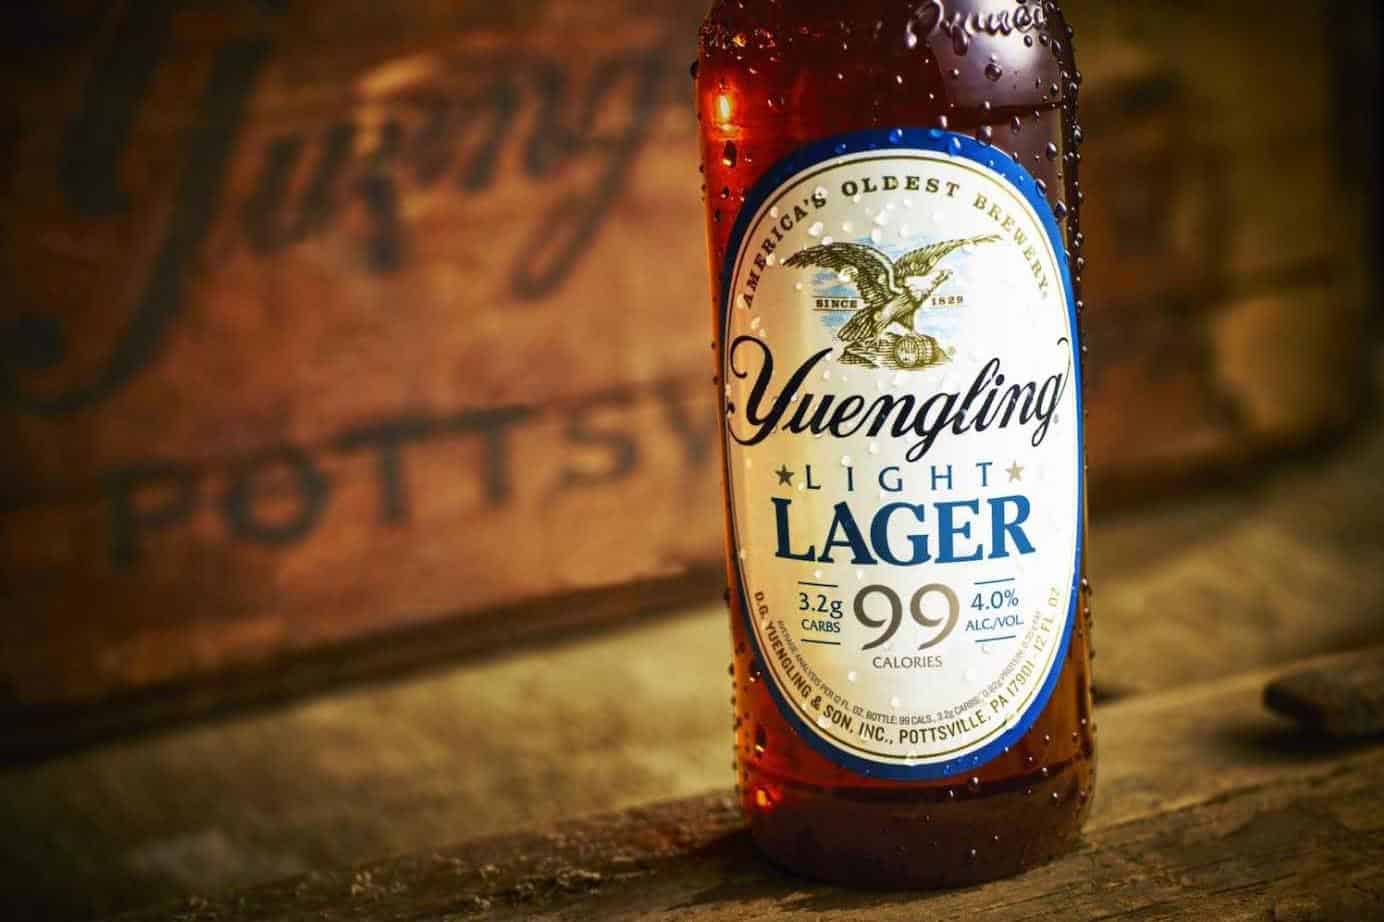 Light Lager by Yuengling Brewery